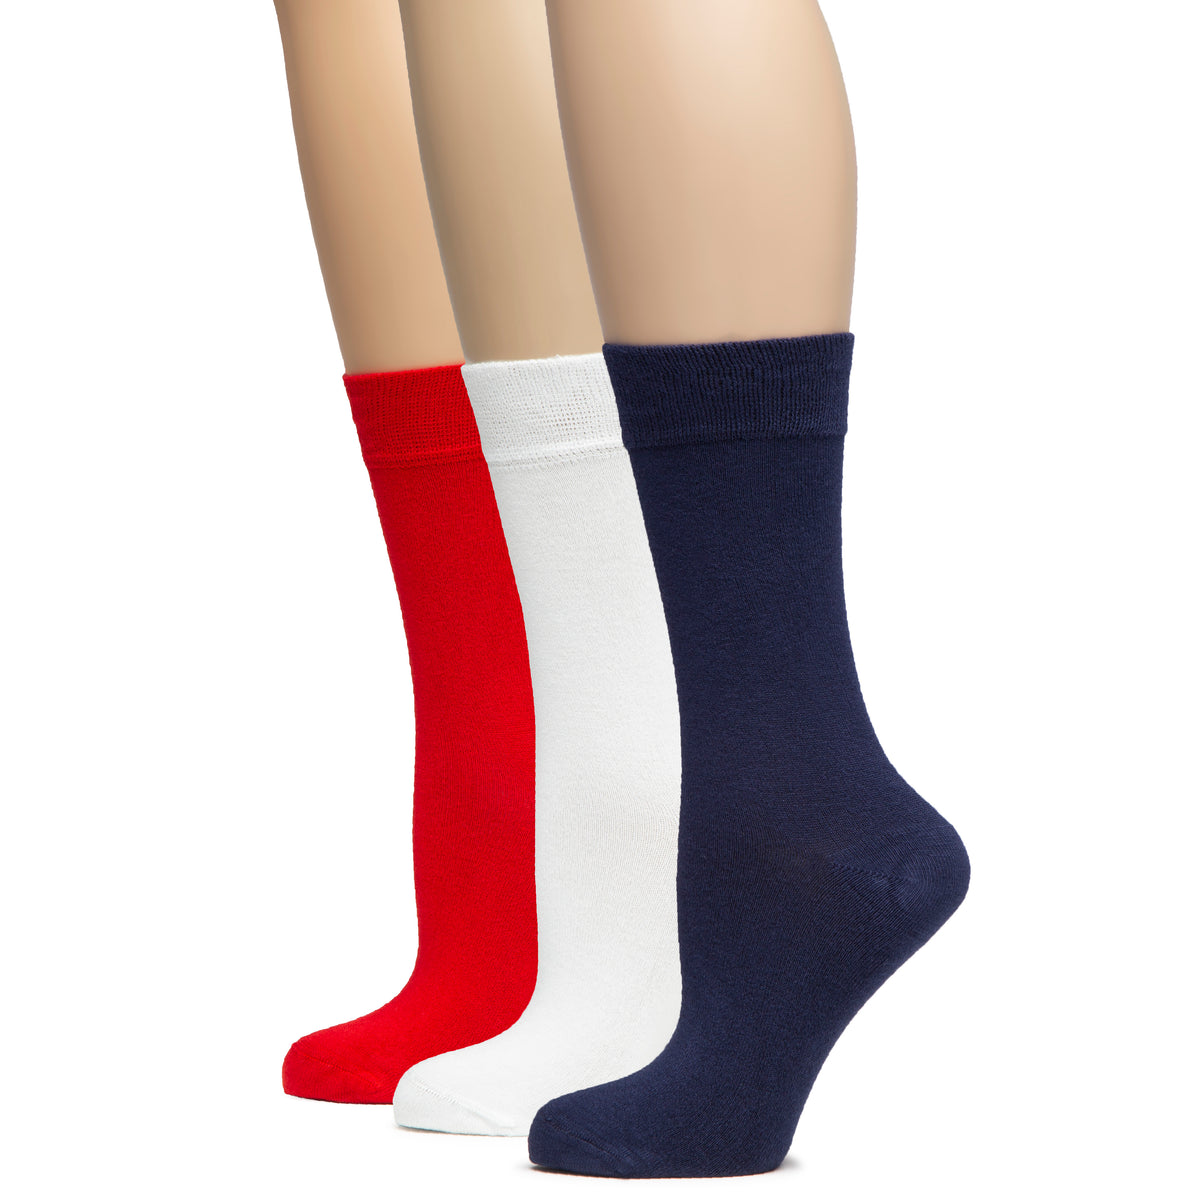 Elevate your sock game with these bamboo crew socks for women in red, white, and blue. Comfortable and stylish.